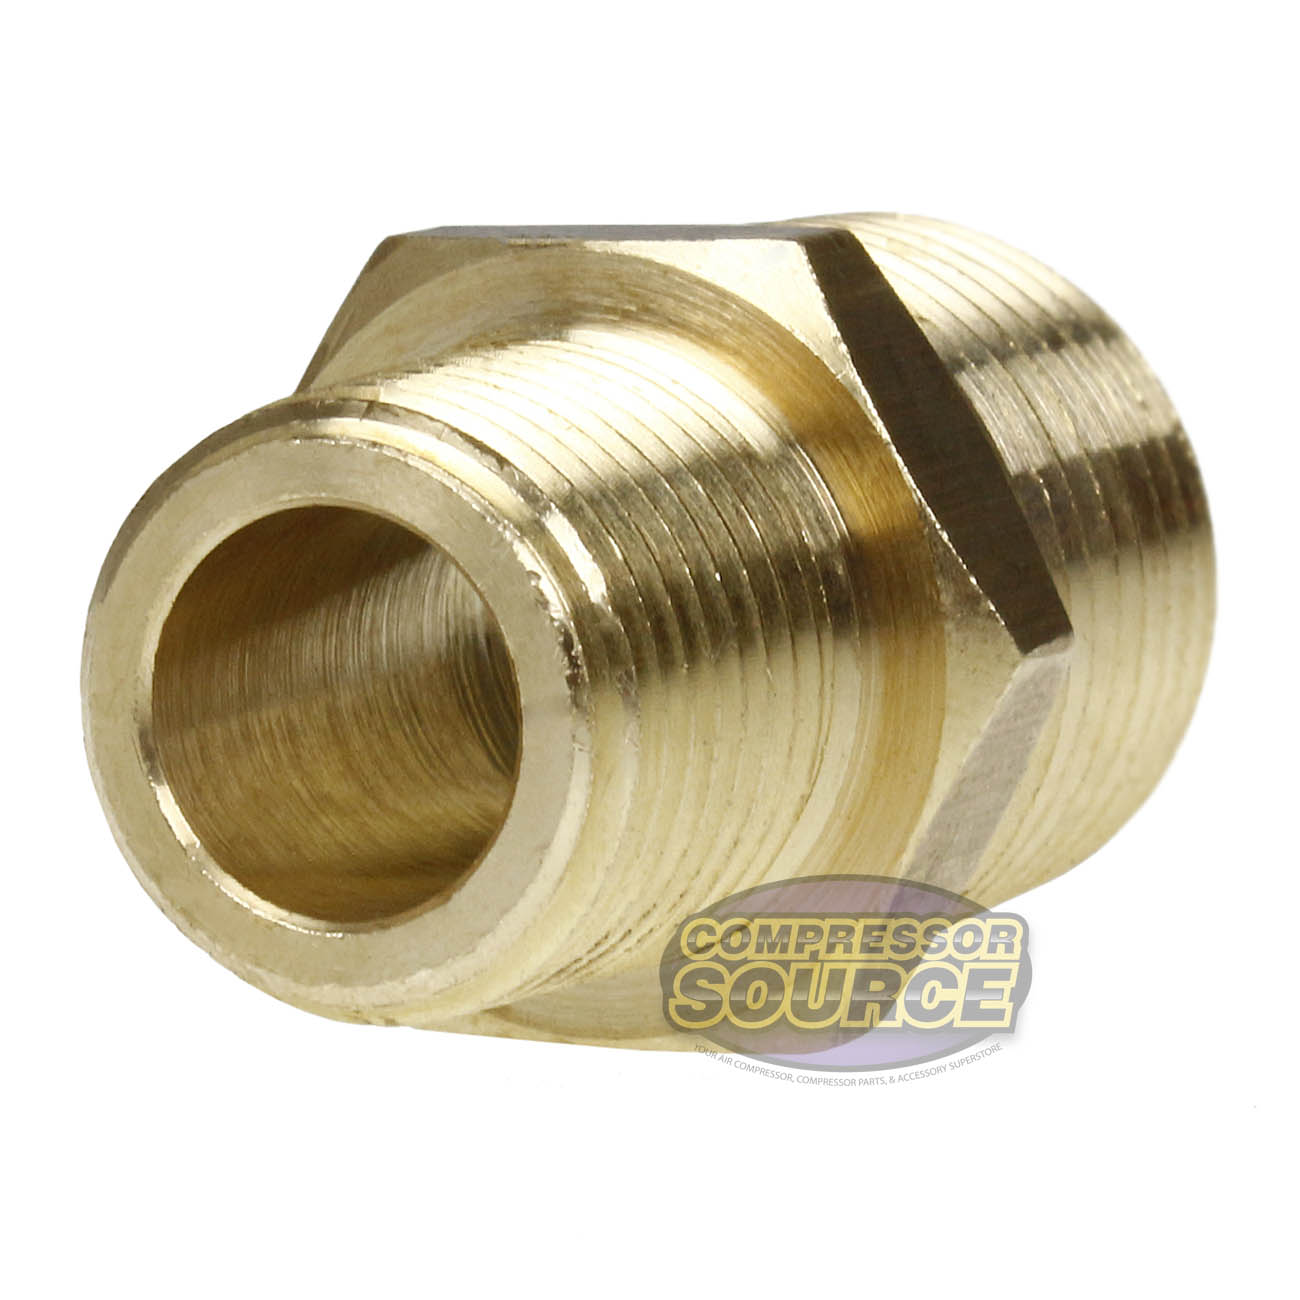 2 Pack 1/2" x 3/8" Male NPTF Pipe Reducing Hex Nipple Solid Brass Pipe Fitting